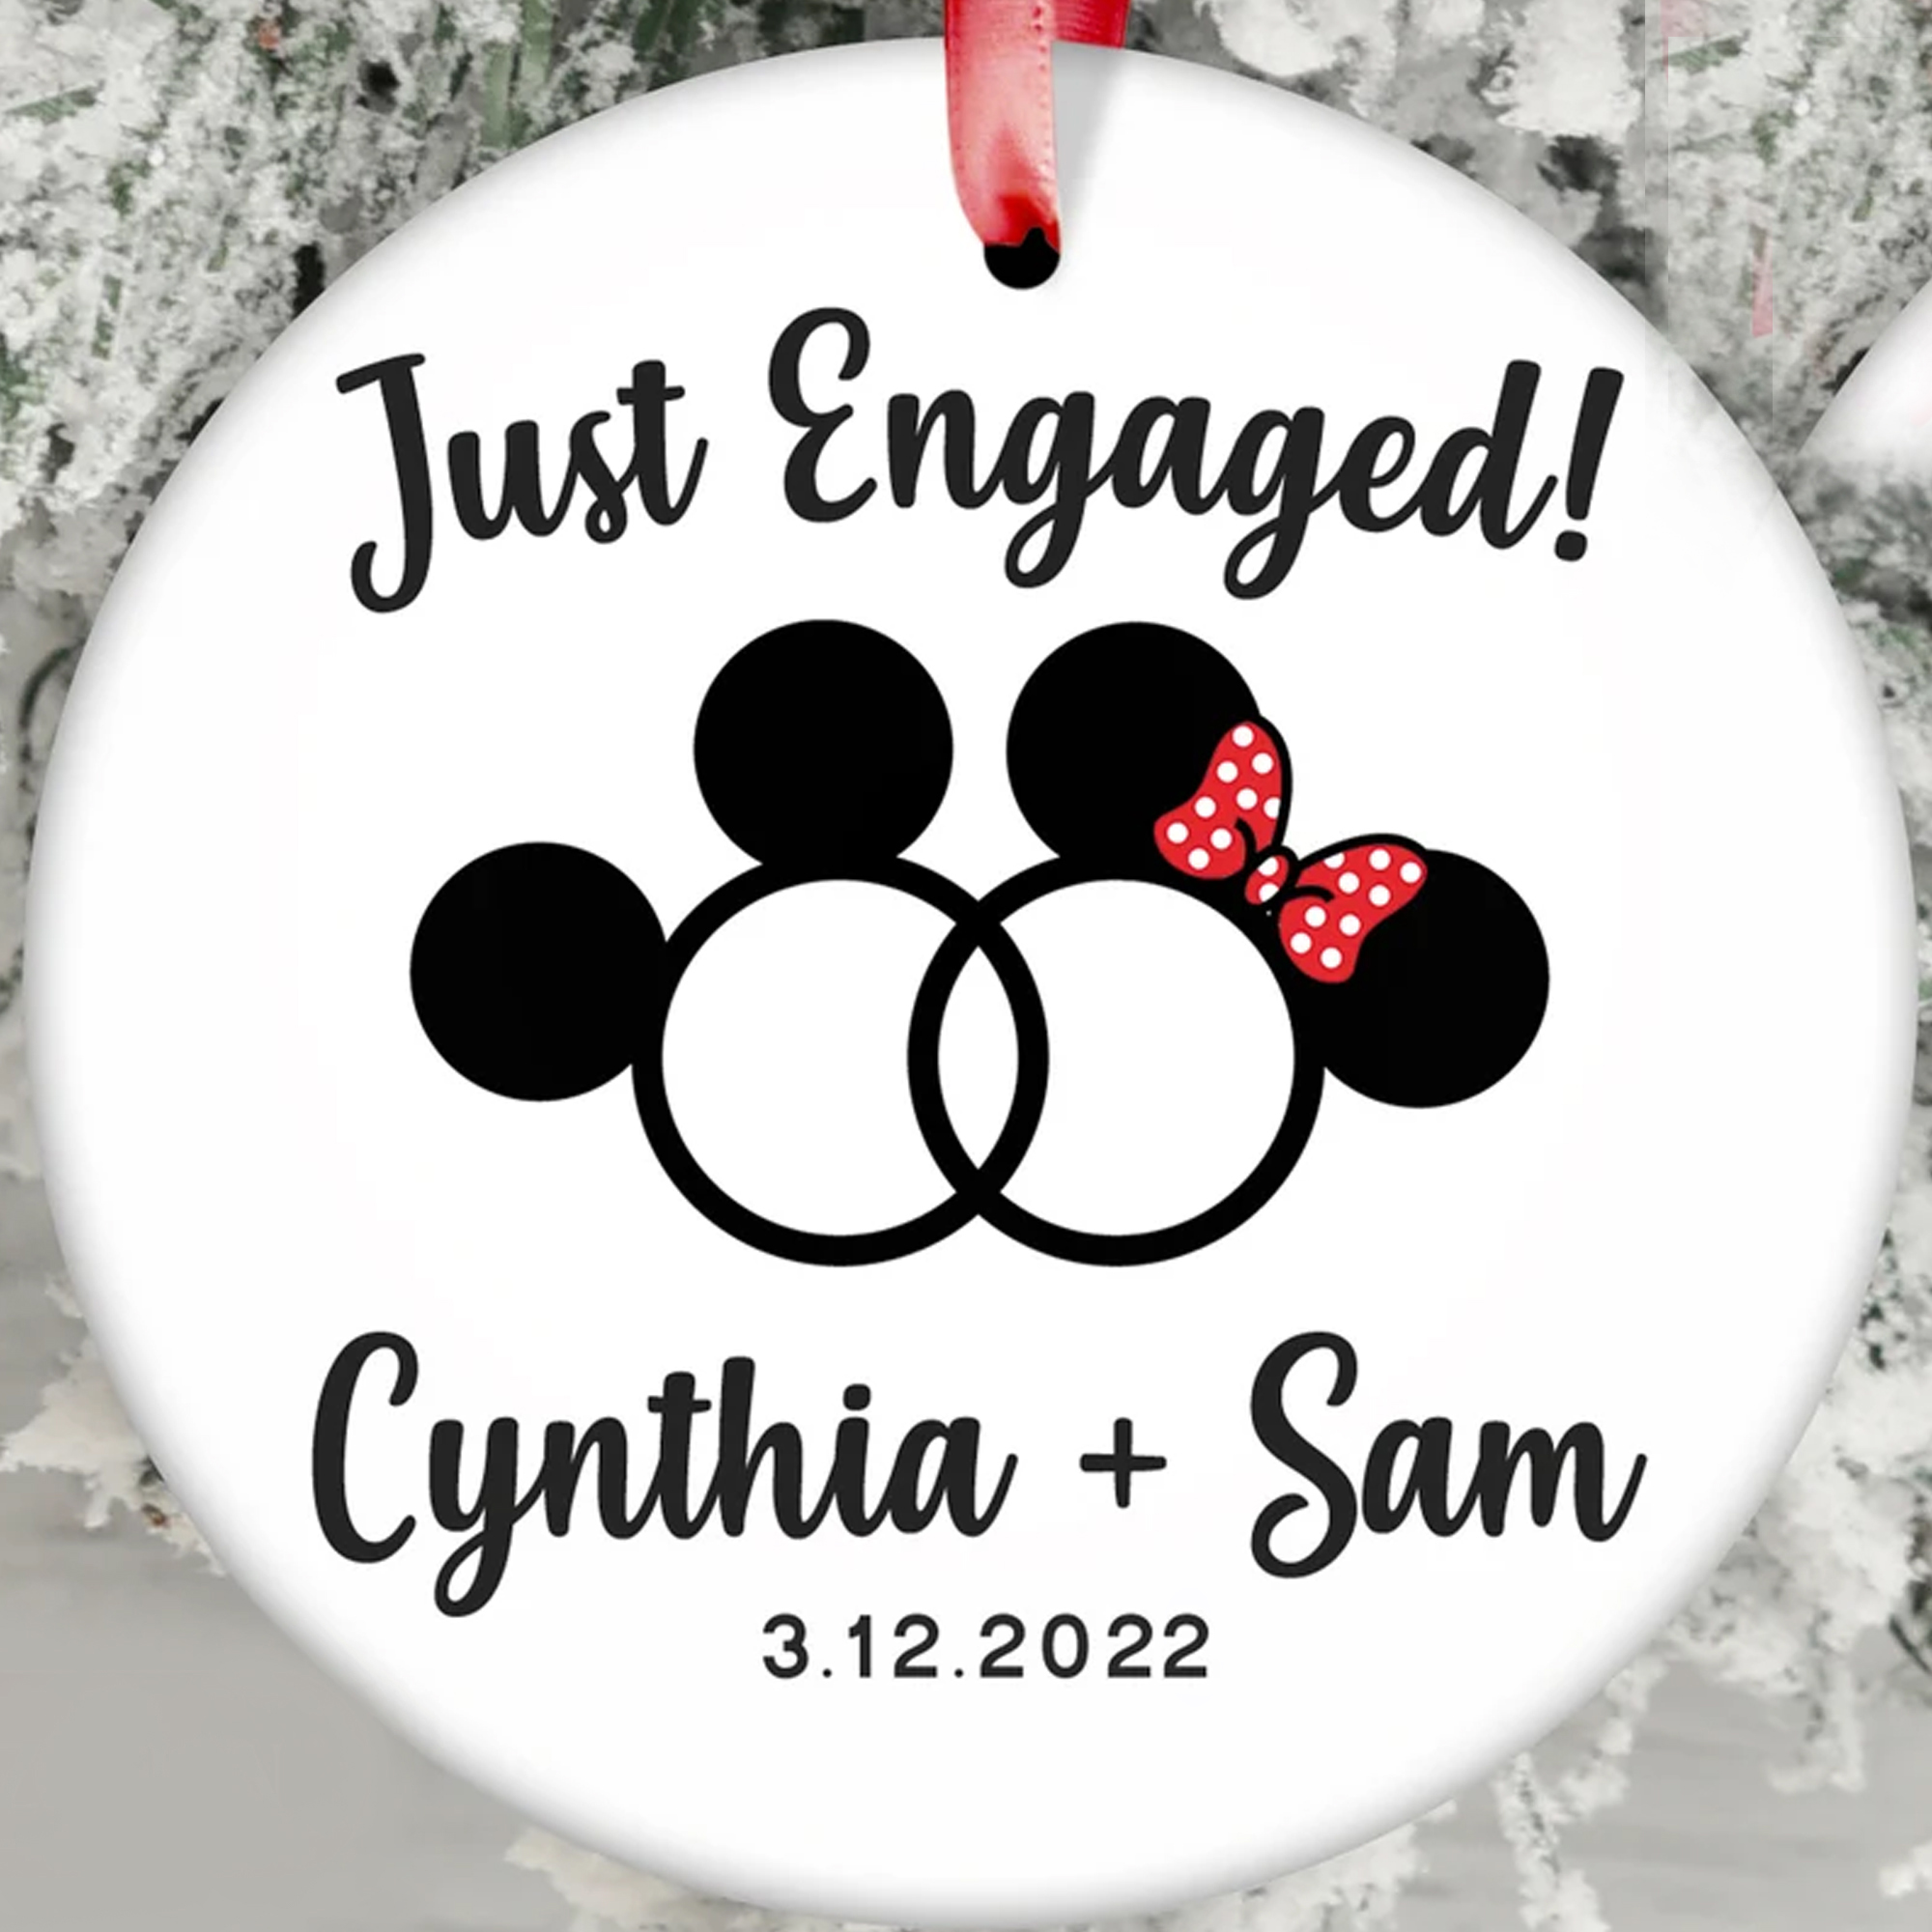 Personalized Christmas Ornaments For Newly Engaged Couple 2022 Ornaments Disney Christmas Ornaments Home Gifts Gifts For Him